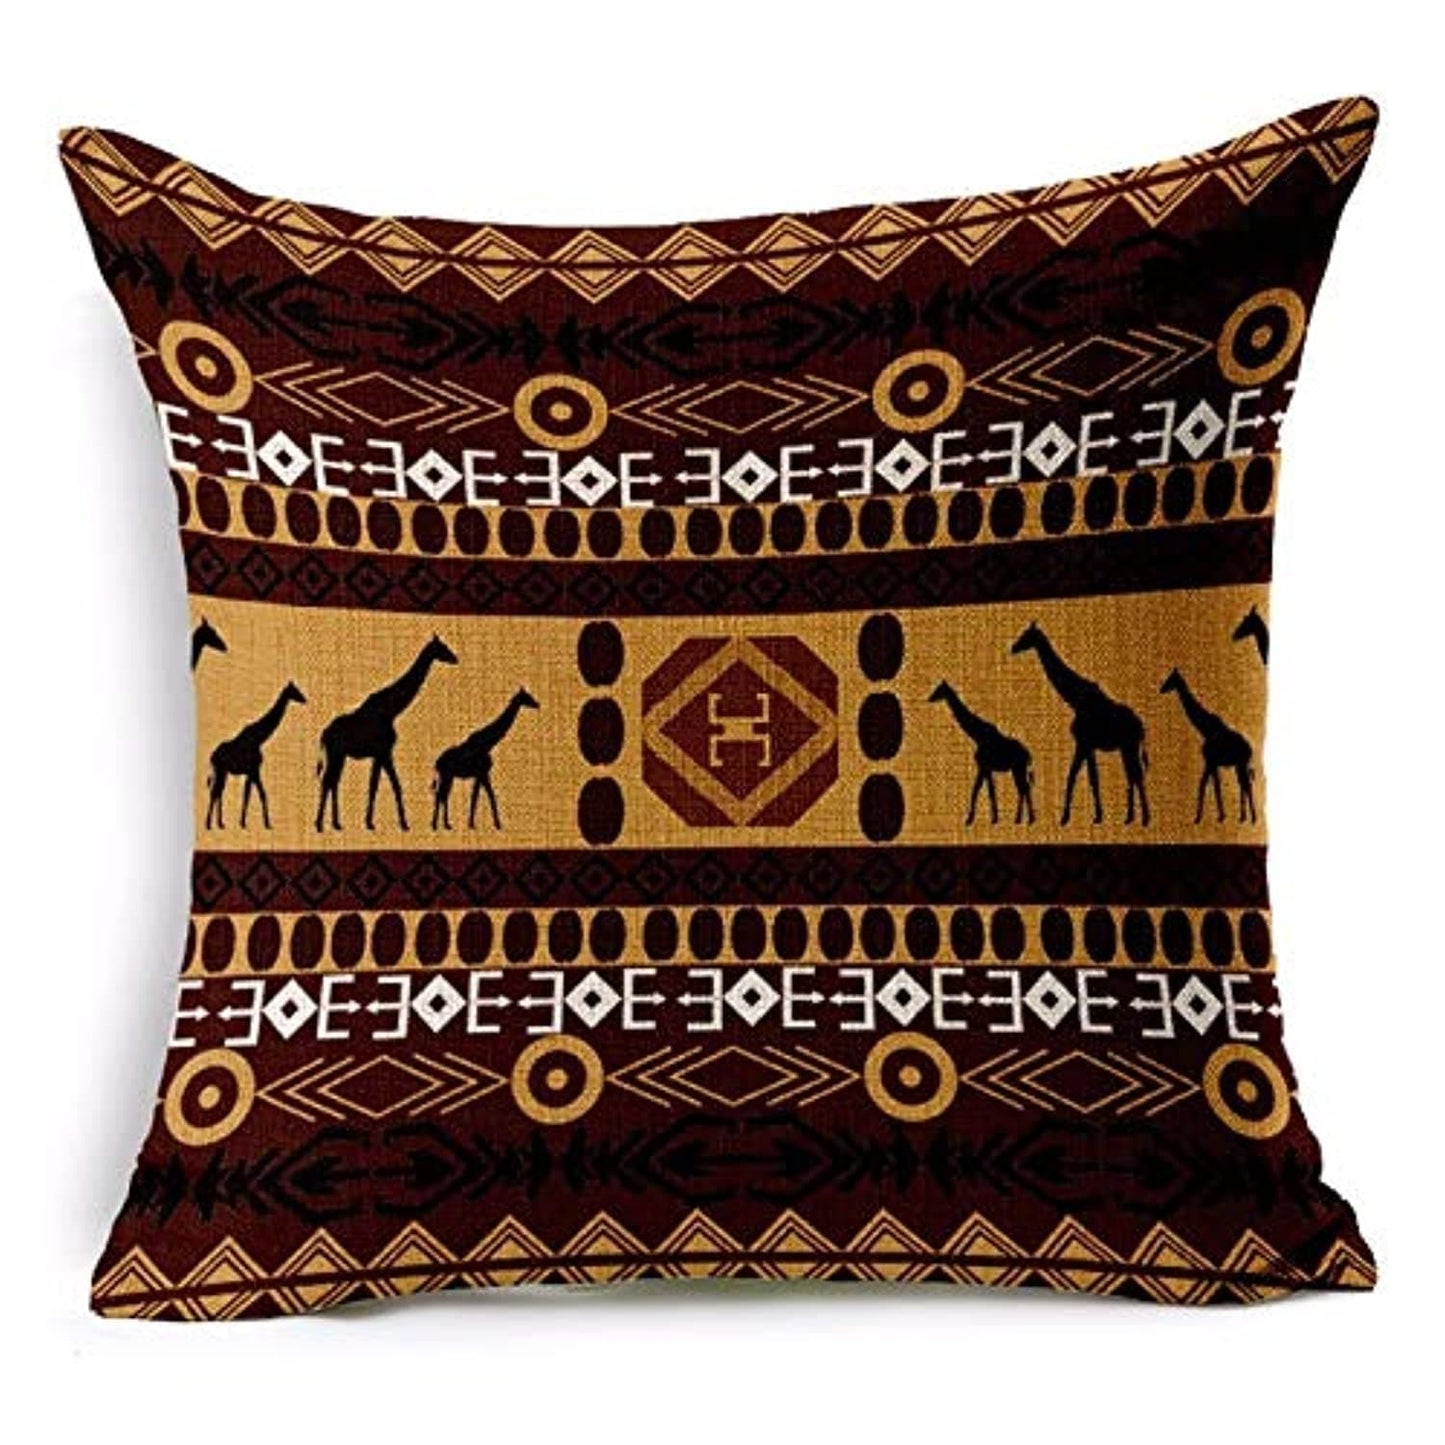 Hand Made Jute Throw/Pillow Cushion Covers Set of 5 Decorative  - 12 x 12 inches (16 X 16 INCHES)